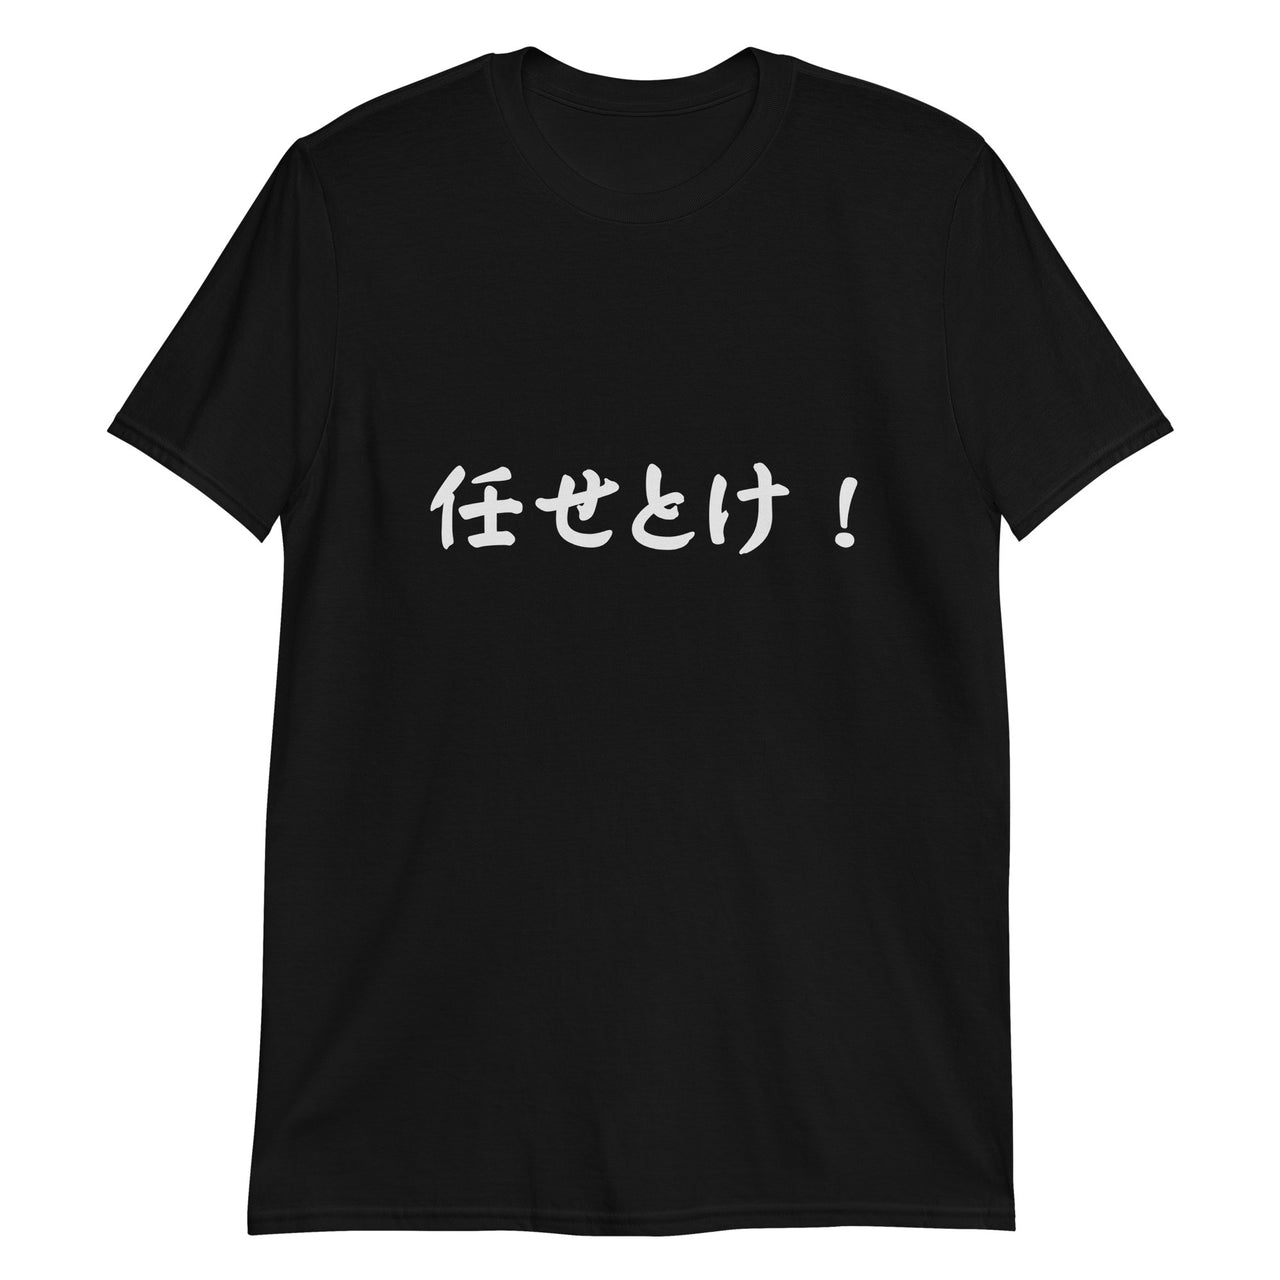 Leave it to Me in Japanese T-Shirt